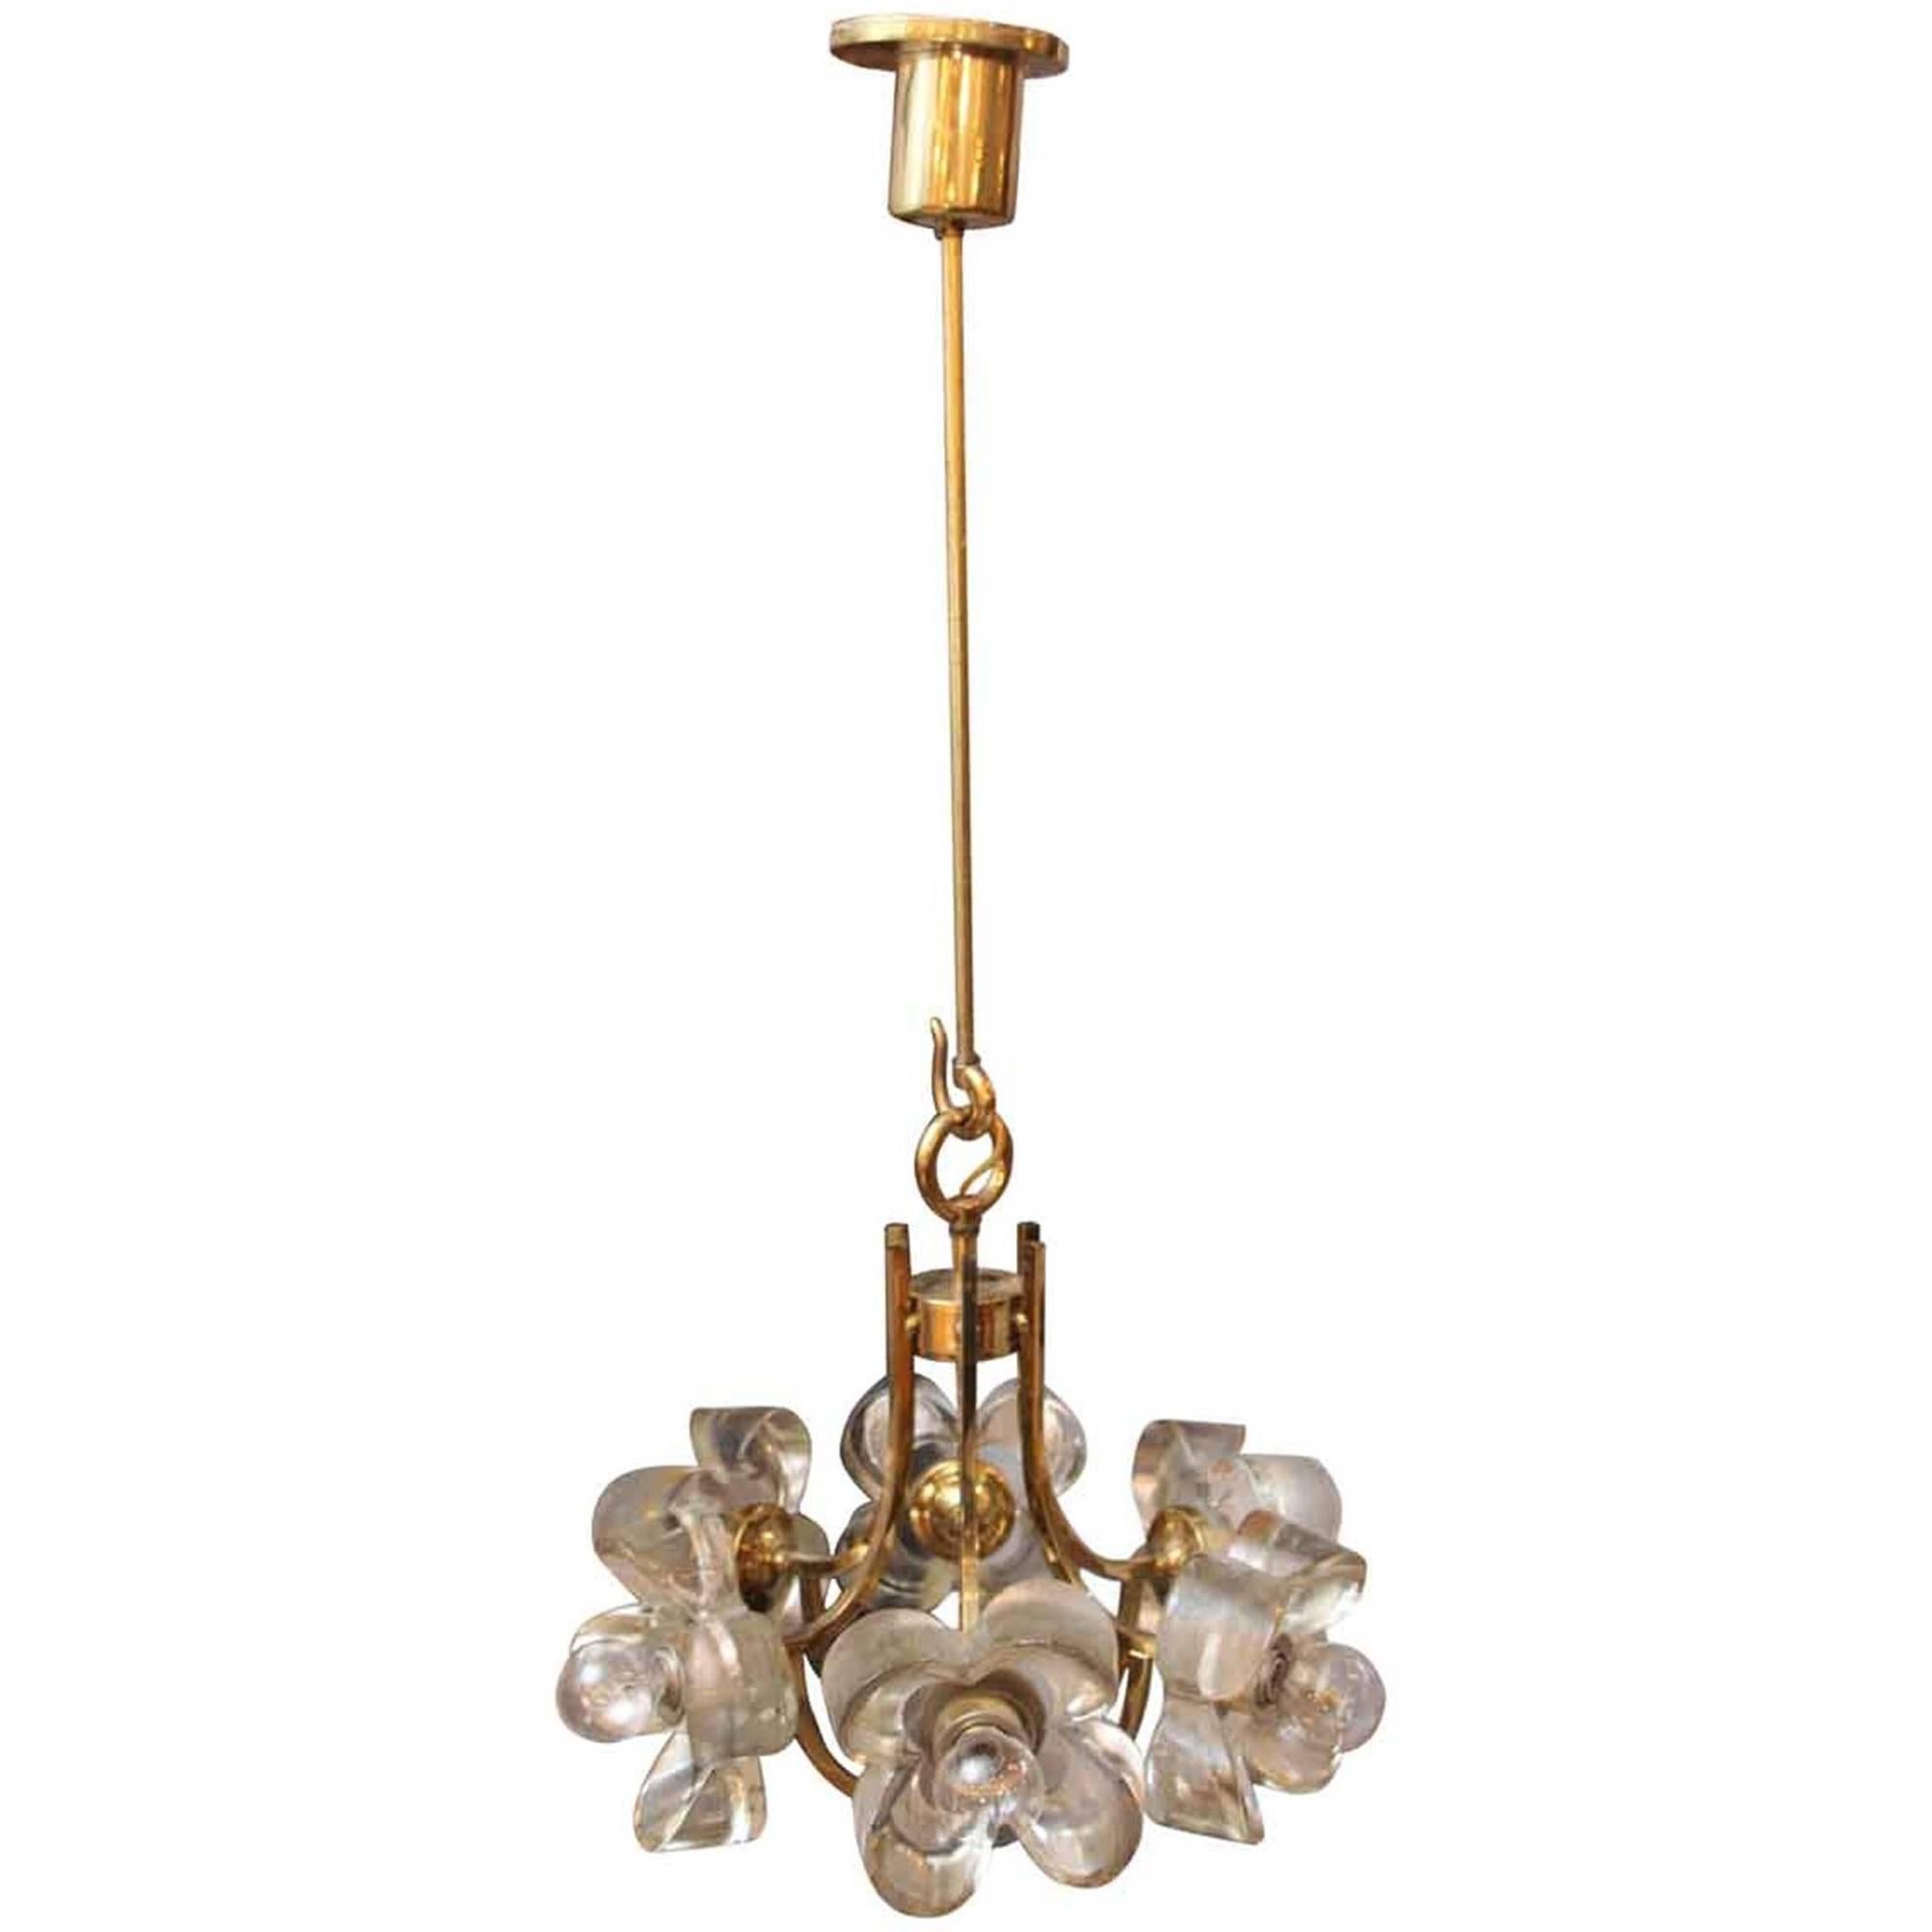 1990s Mid-Century Modern Floral Glass and Brass Pendant Light with Six Lights